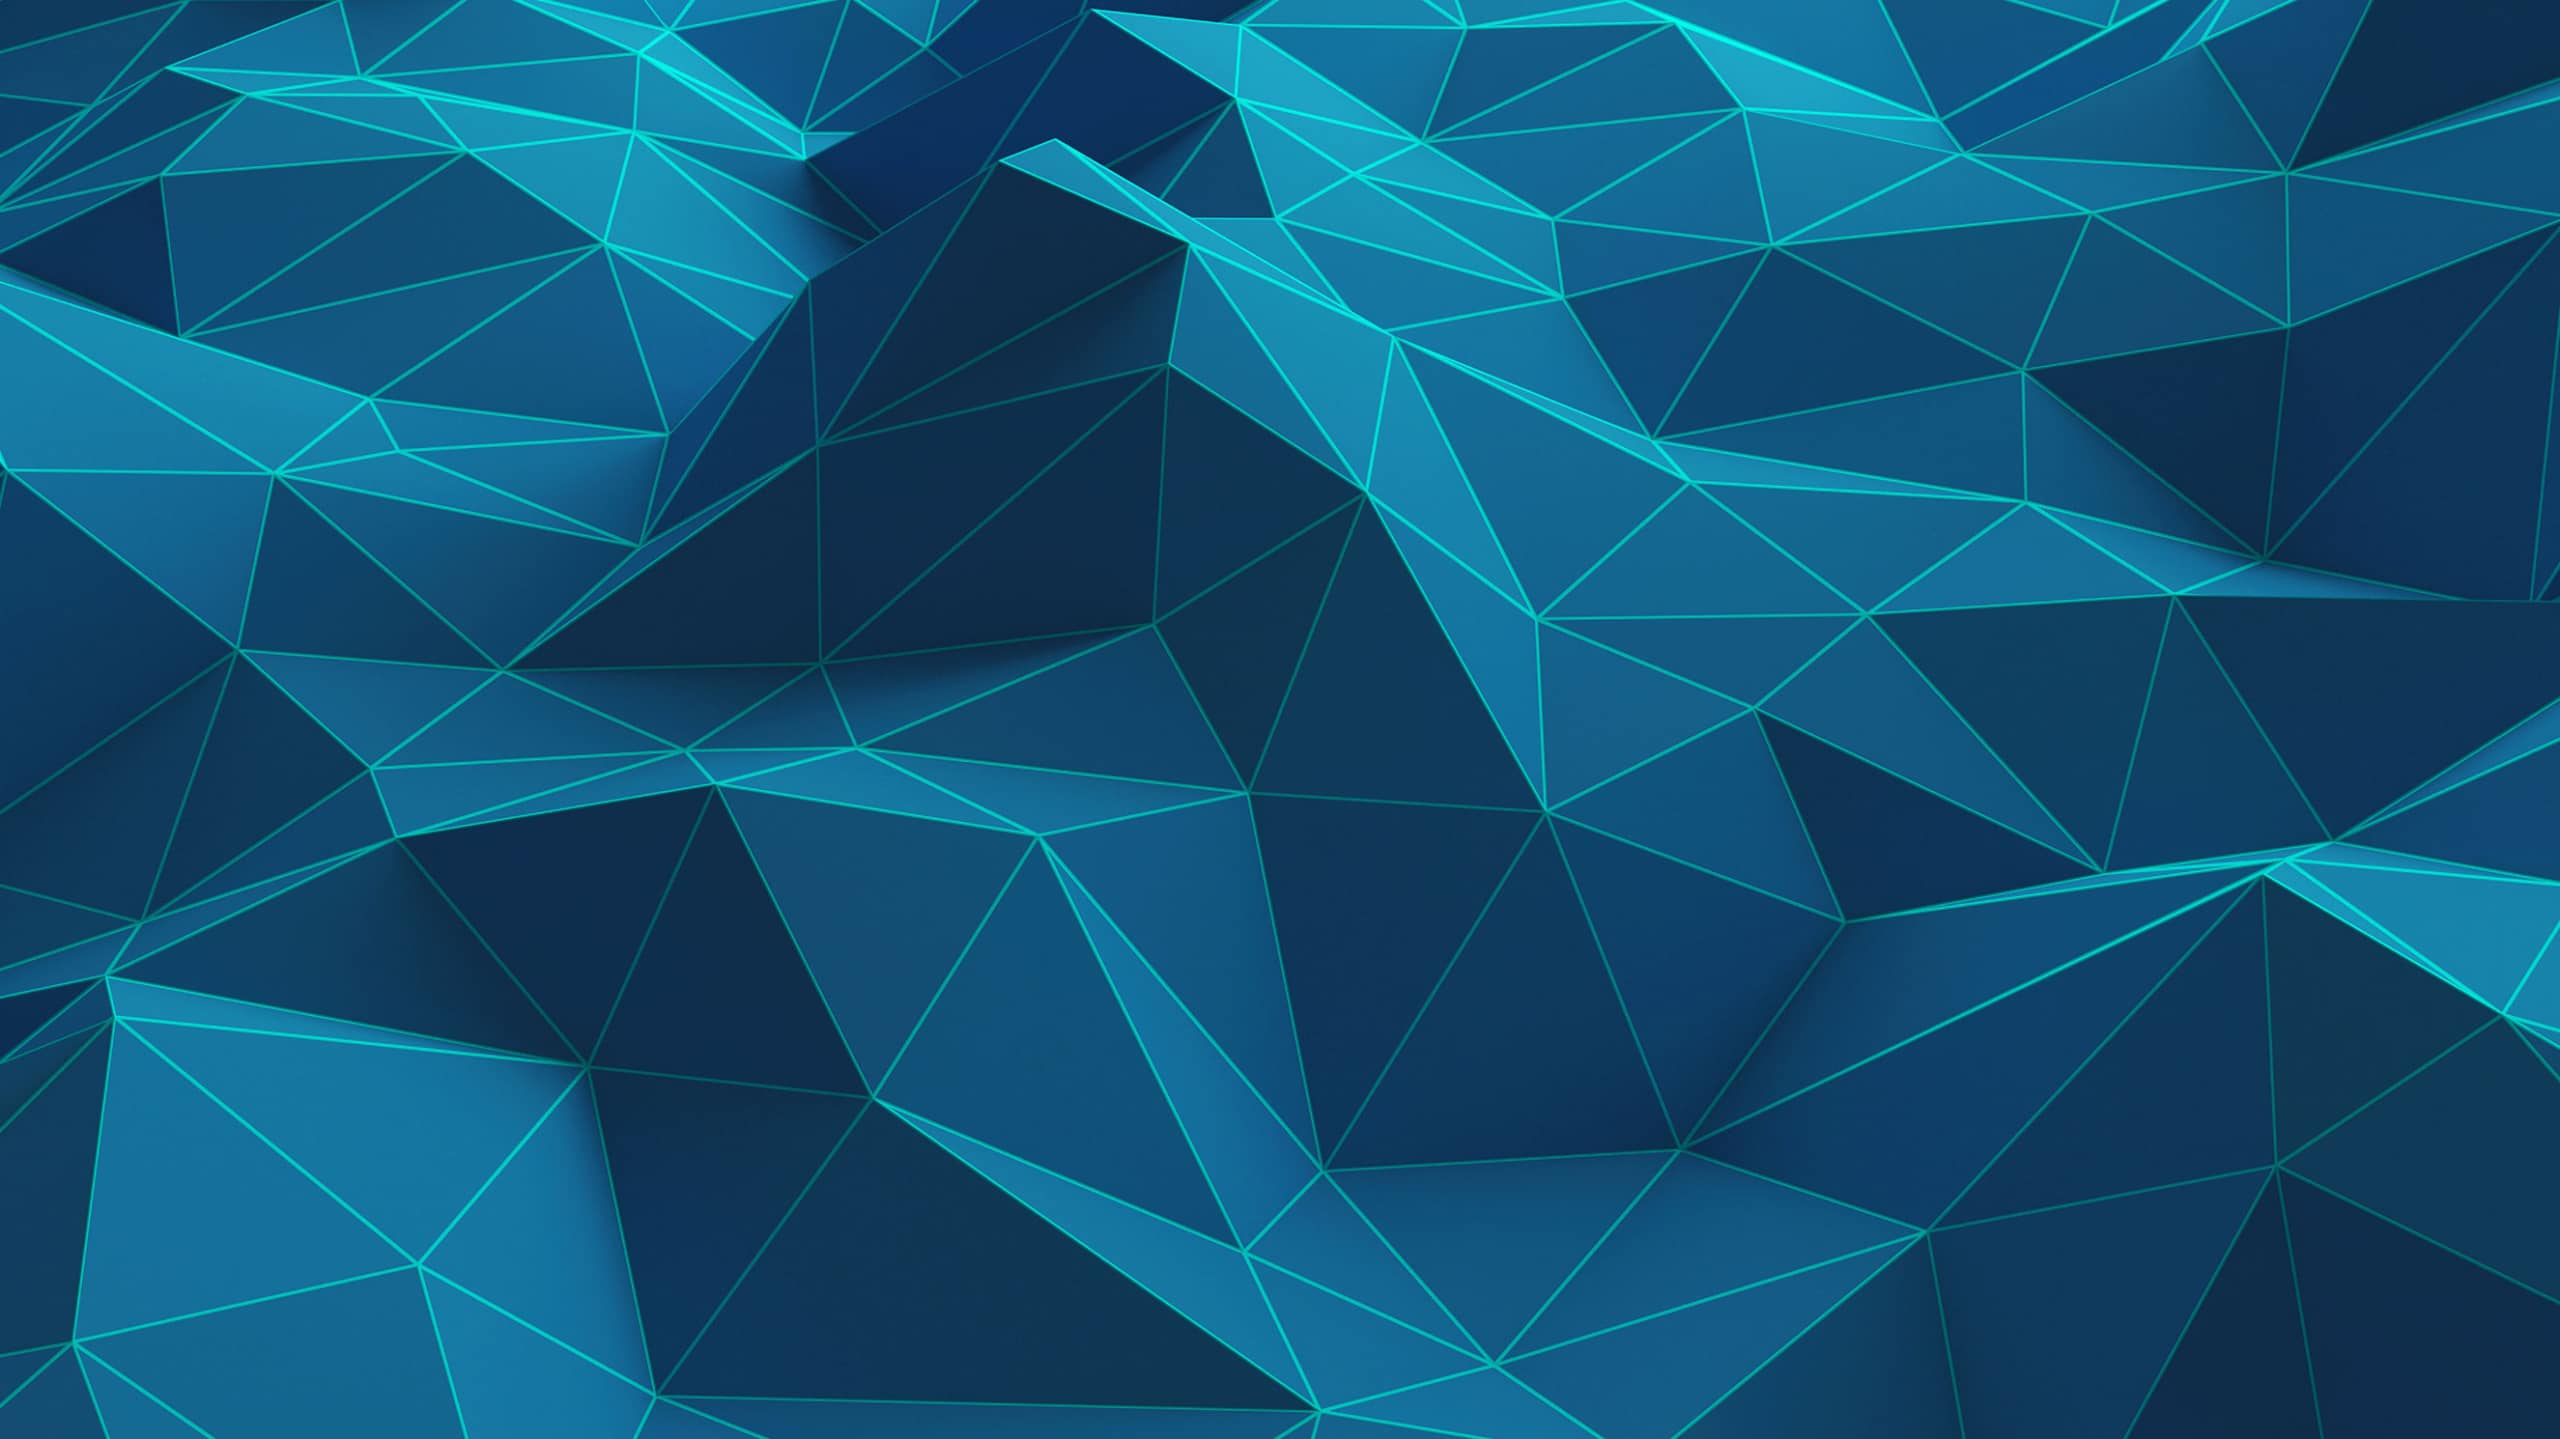 Abstract geometric background with a pattern of blue polygonal shapes in various shades, creating a 3D effect using DNSDB API Version 2.